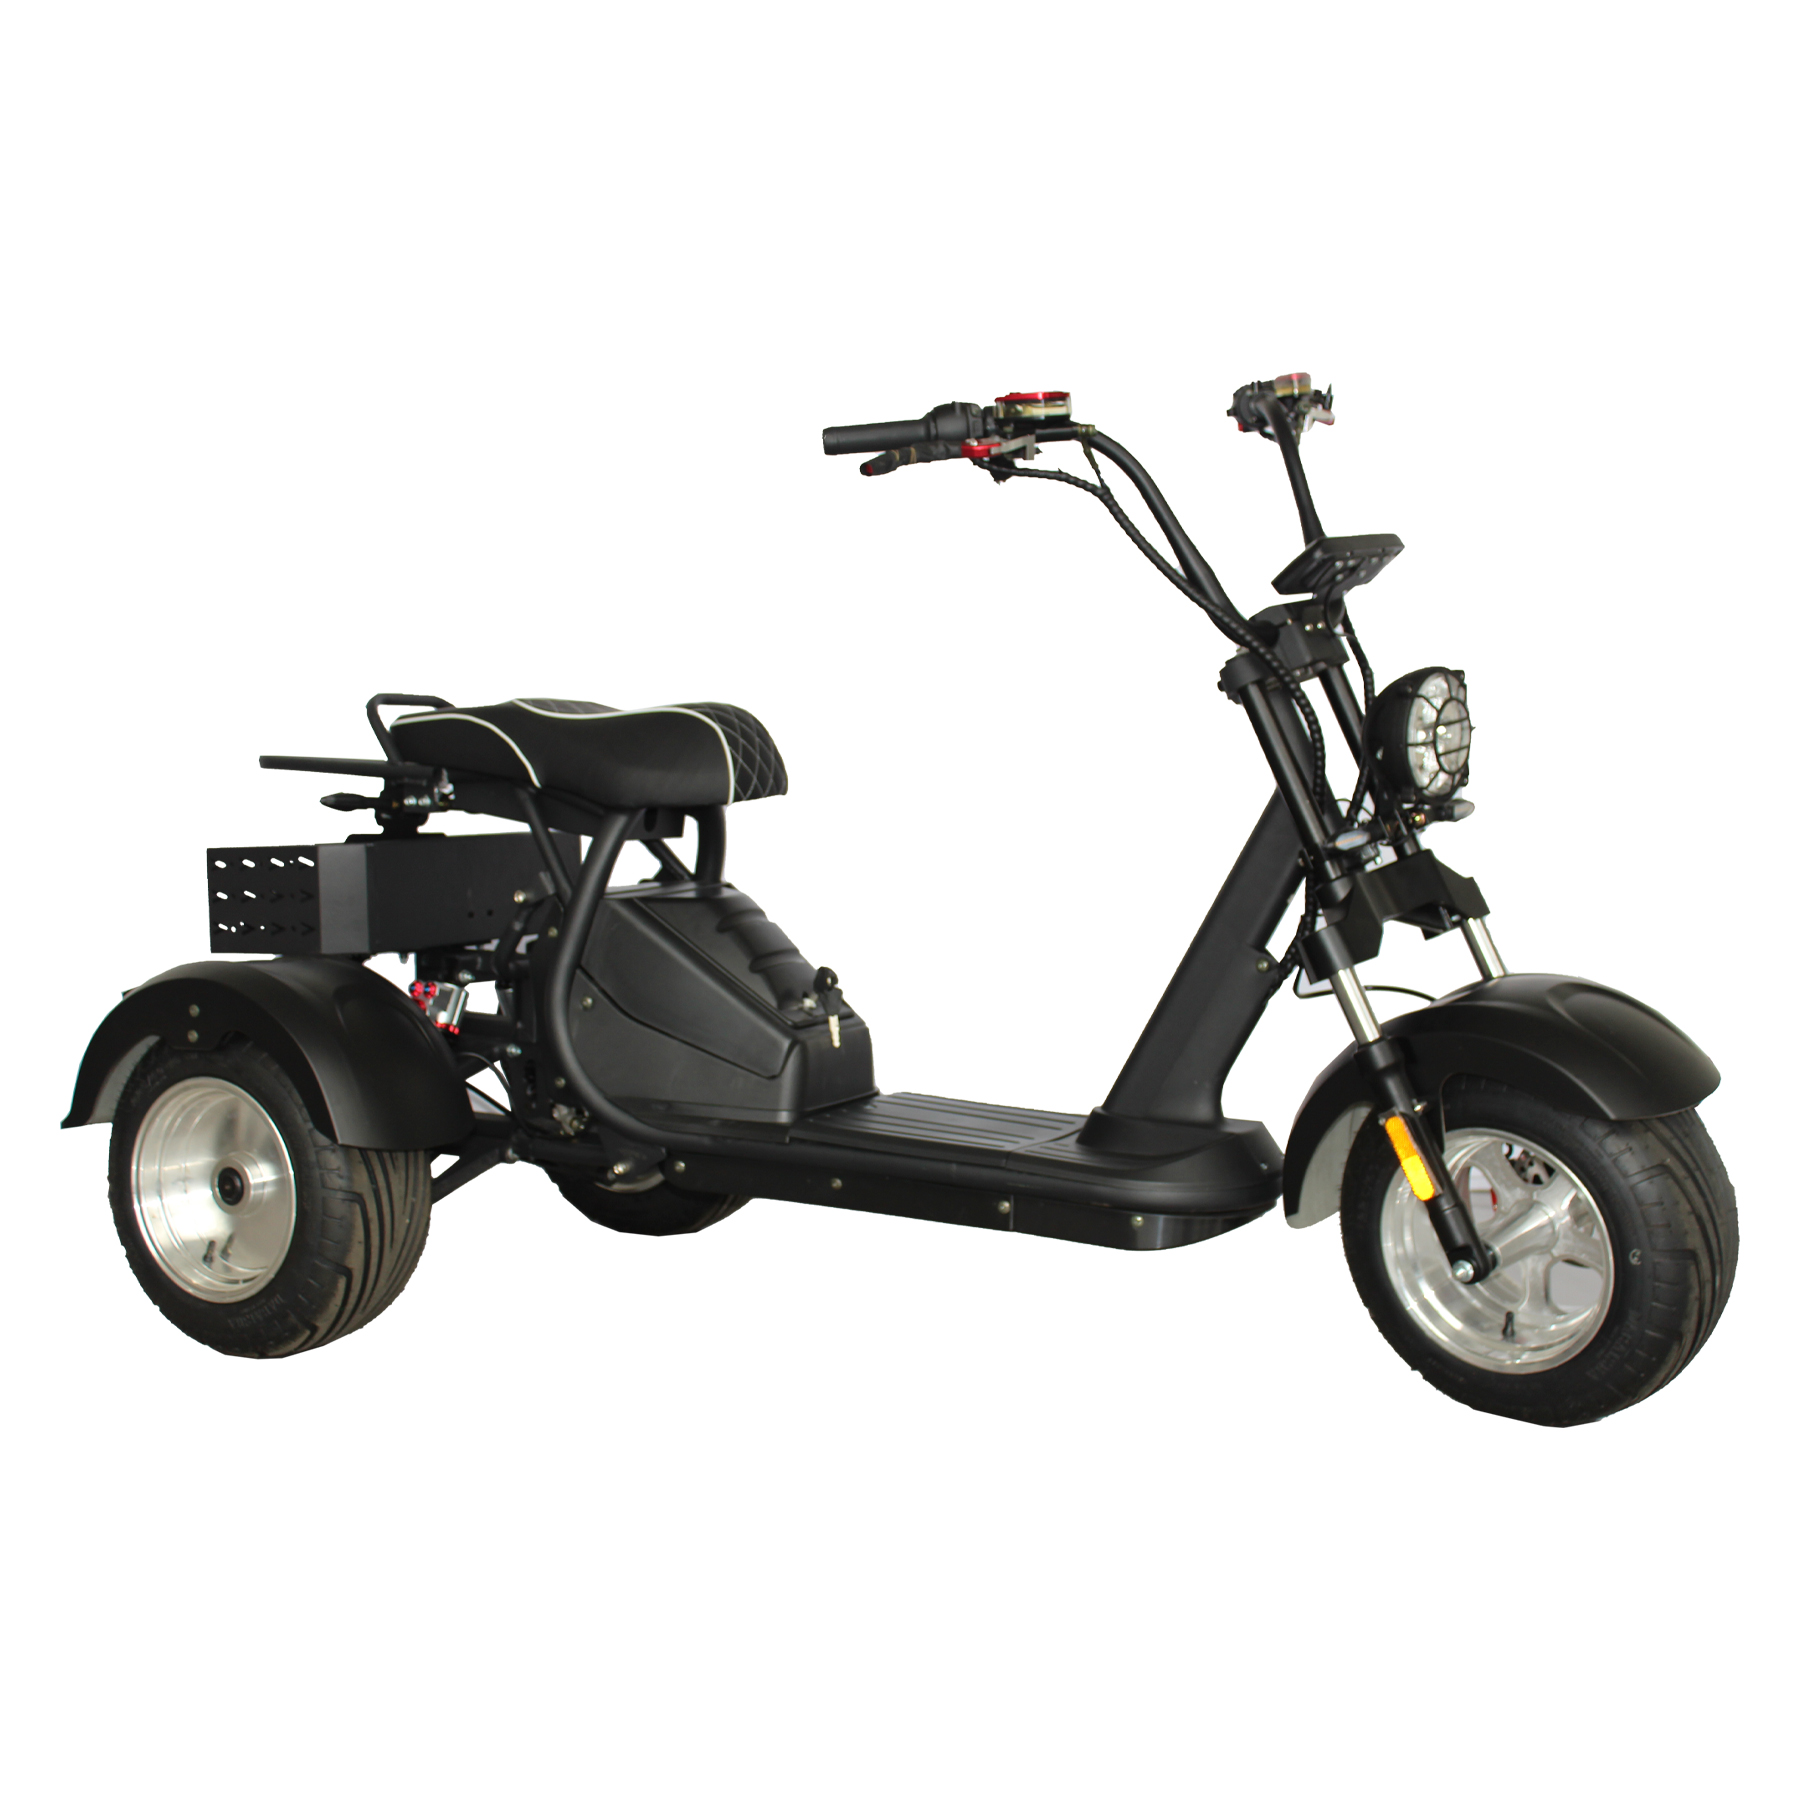 GaeaCycle Street Legal COC Electric Delivery Scooter 3 Wheels Adult Tricycle with Cargo Box Rack